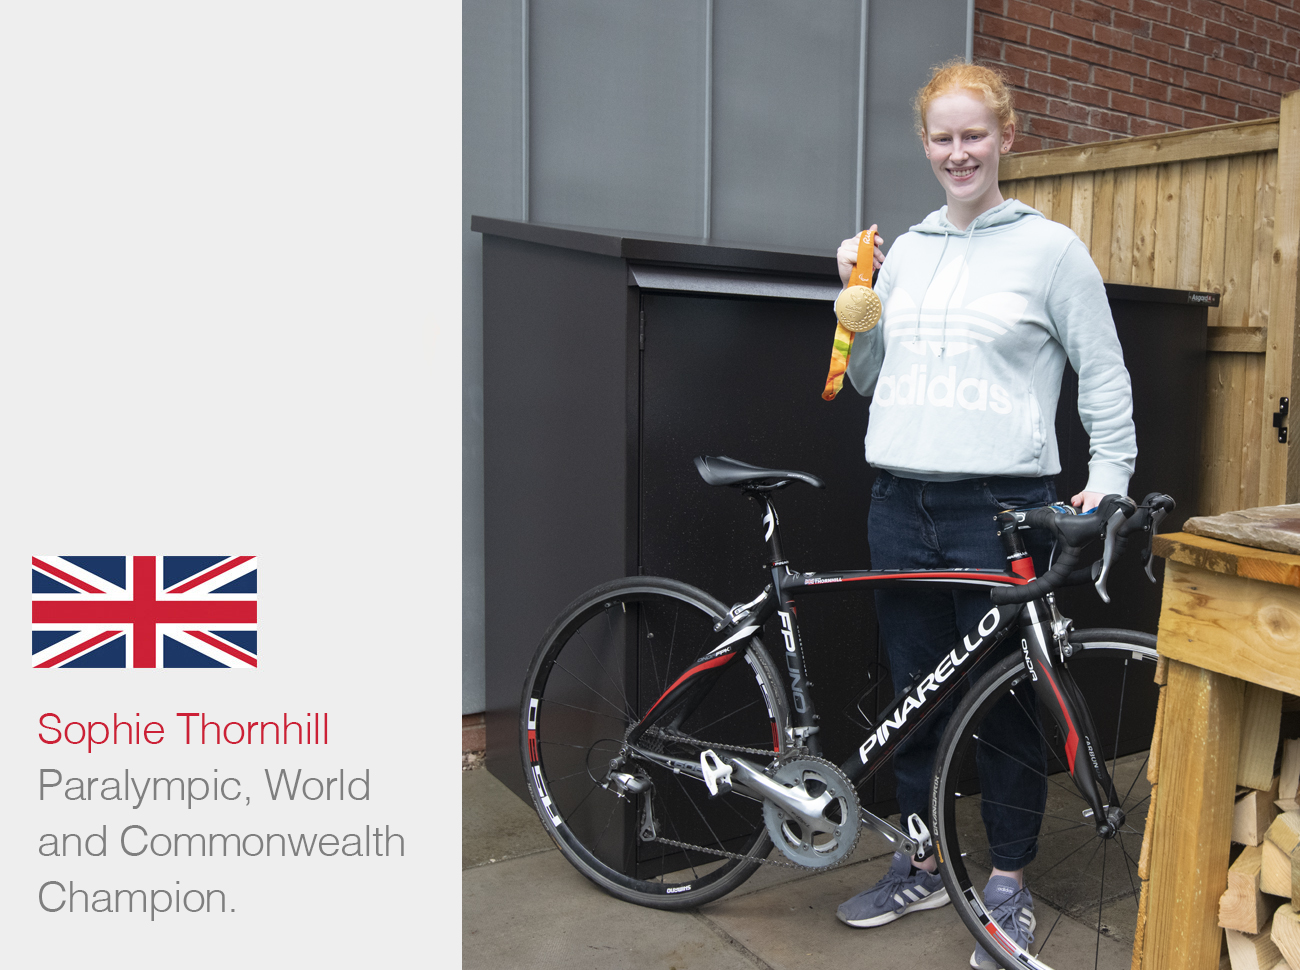 Sophie Thornhill gets an Asgard Bike Storage Shed